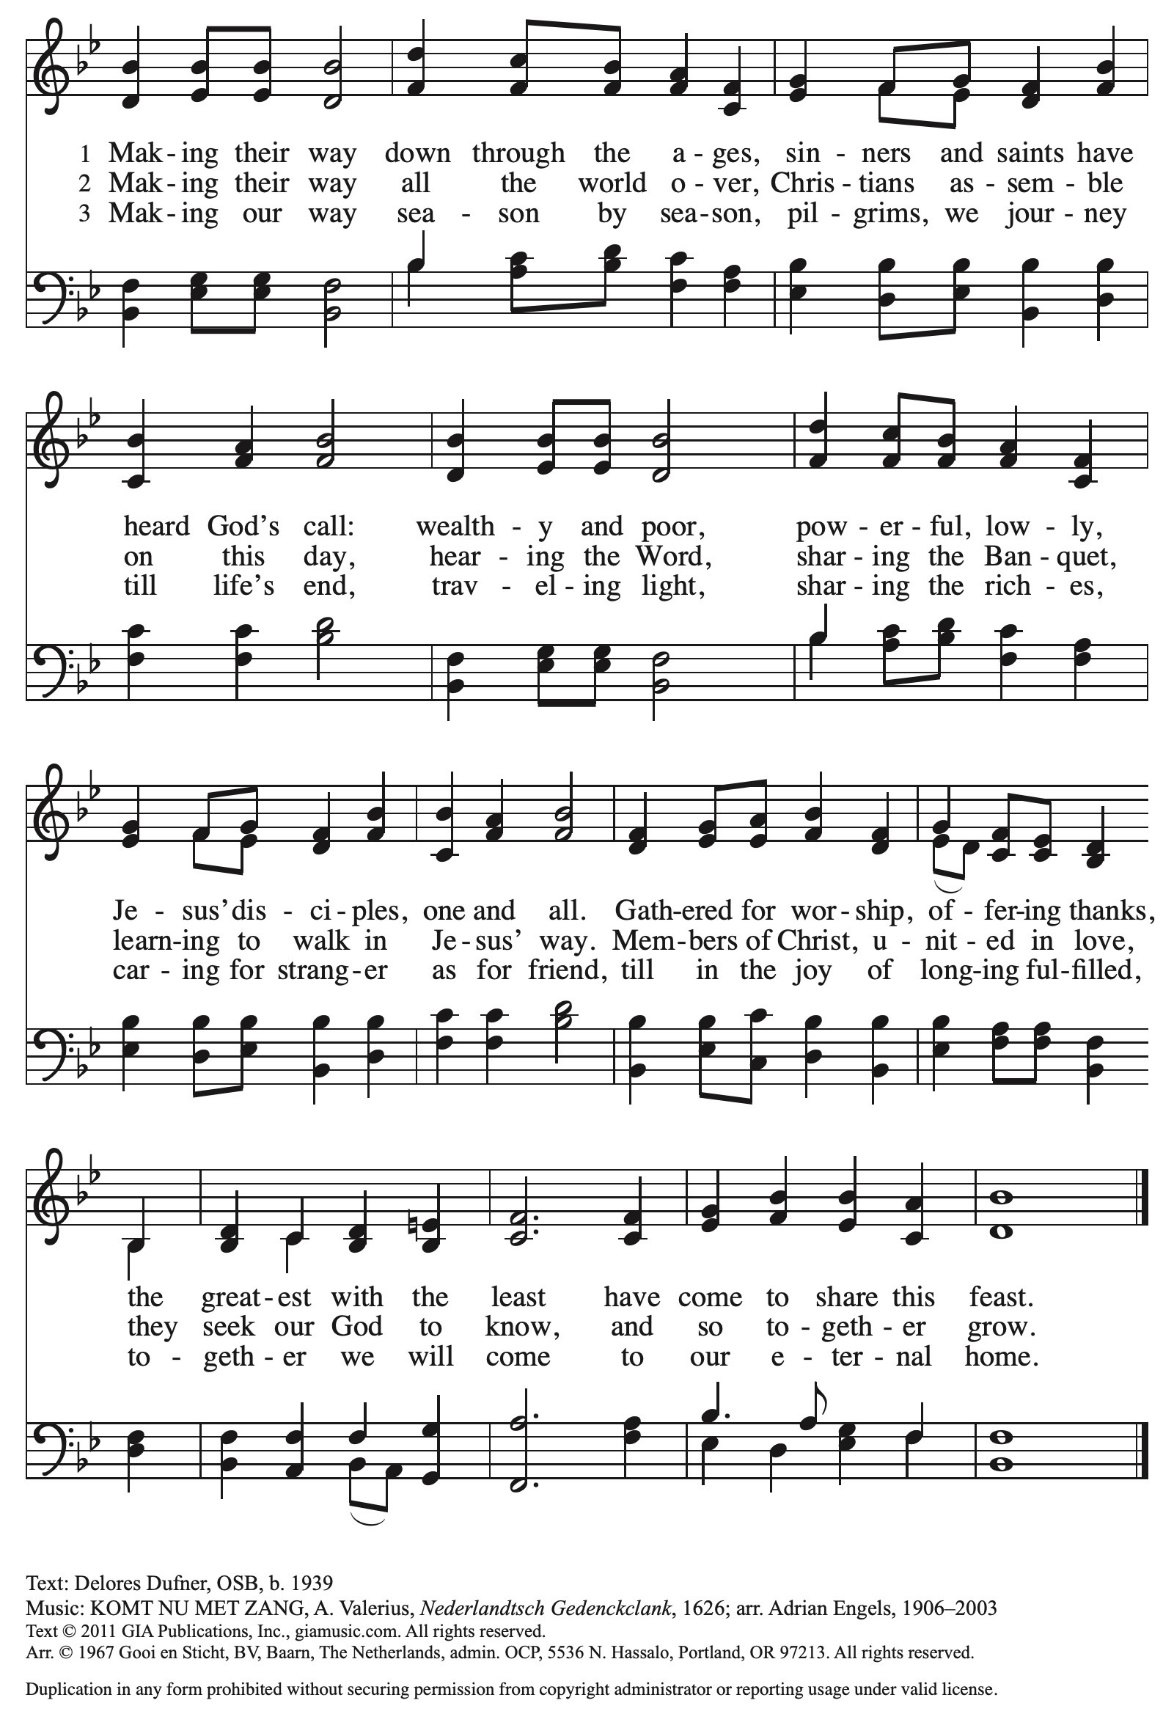 A sheet music with black and white text

Description automatically generated